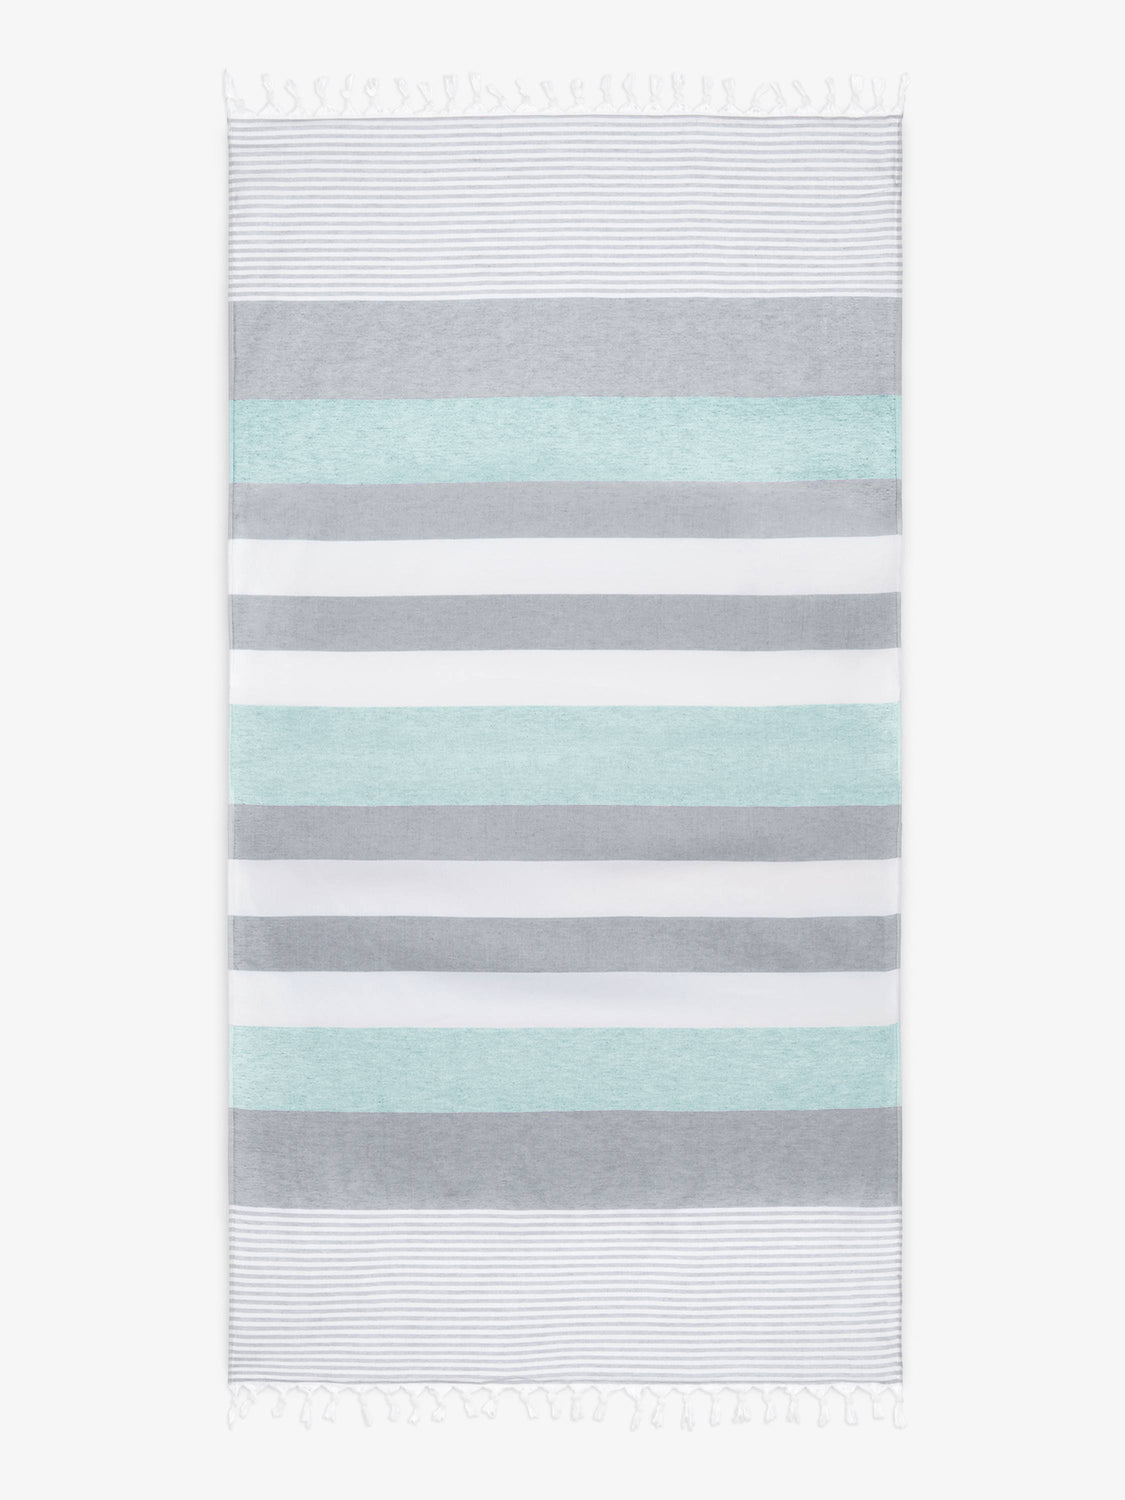 An oversized, teal and gray striped Turkish cotton towel with white fringe laid out. 